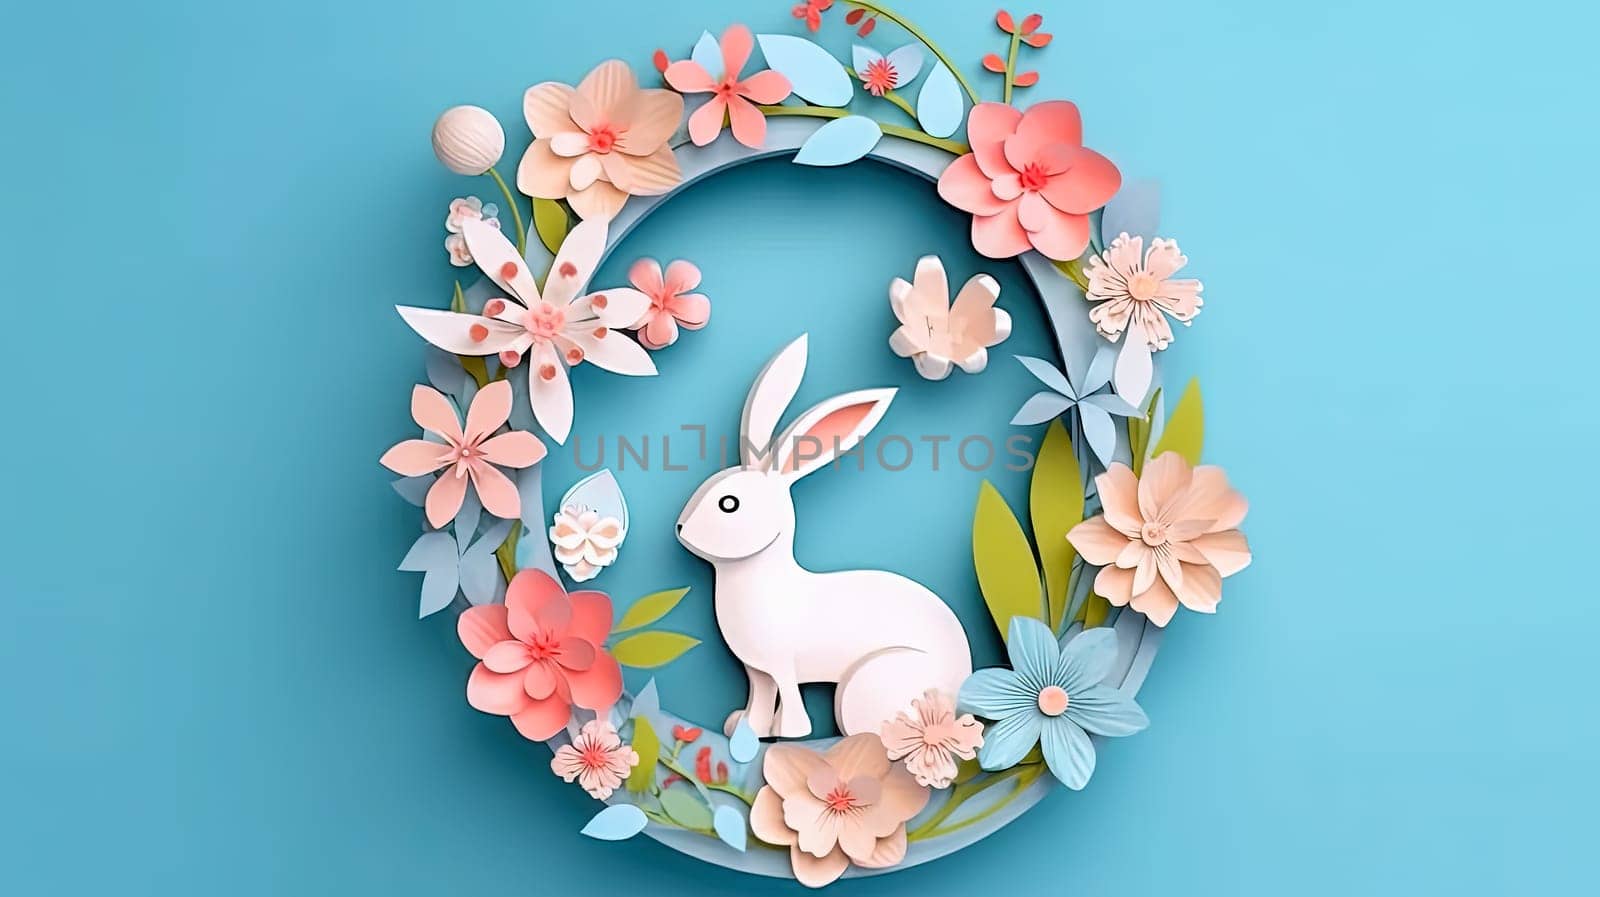 Easter joy unfolds, Bunny on colored paper a vibrant scene resonating with the happiness of the holiday, celebrating the arrival of spring